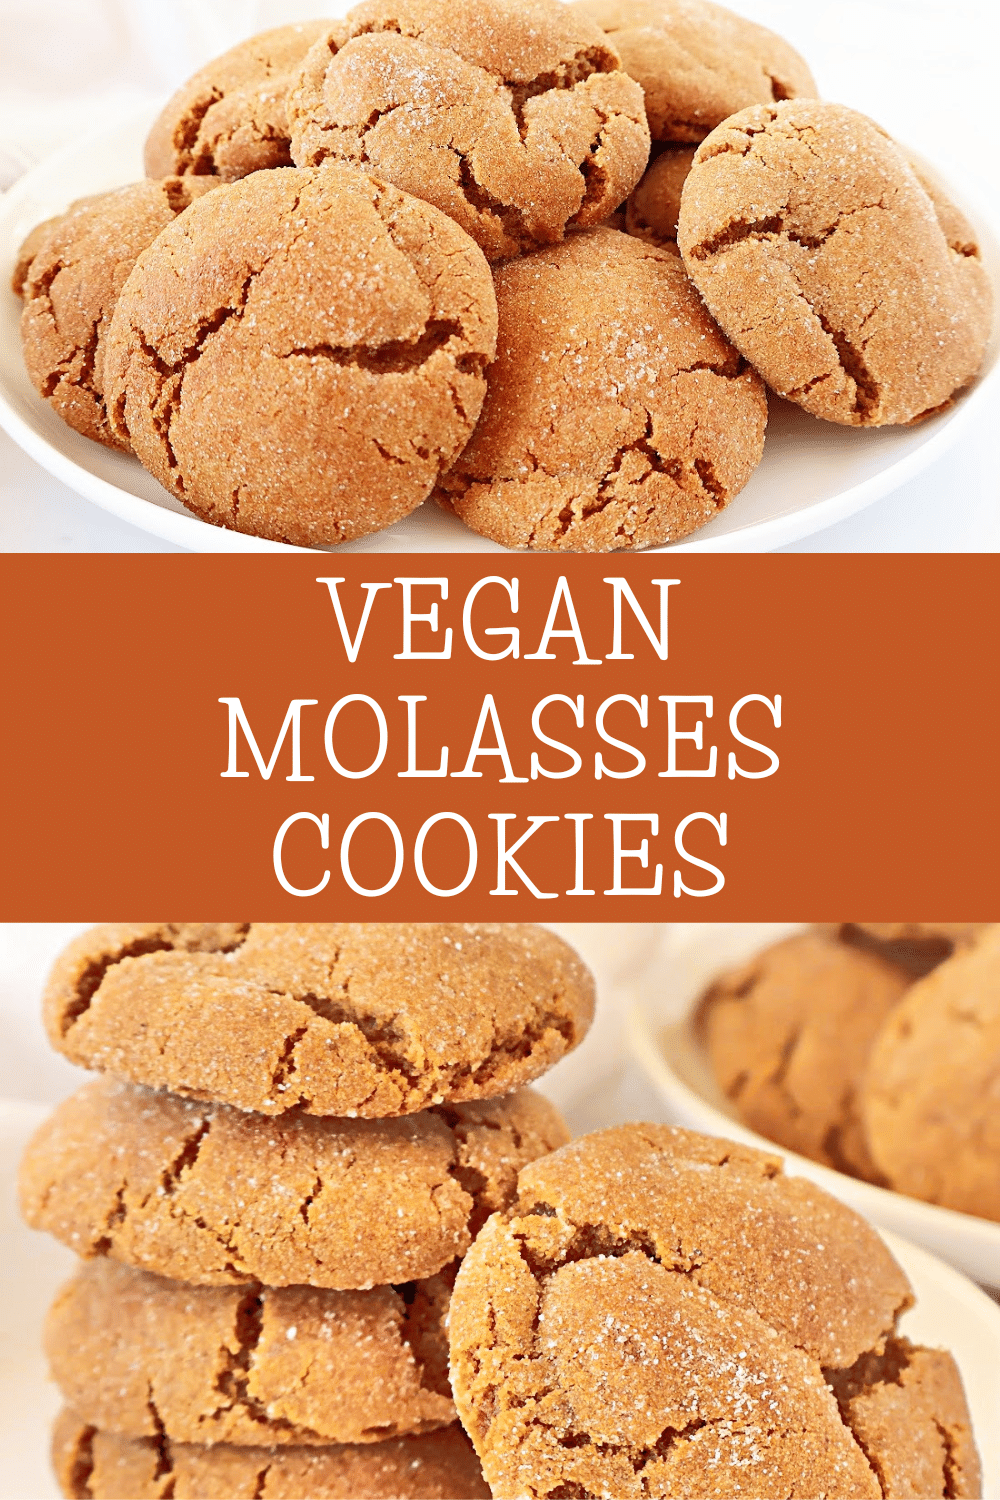 Vegan Molasses Cookies ~ Soft and chewy molasses cookies that will fill your kitchen with the aroma of warm spices! via @thiswifecooks